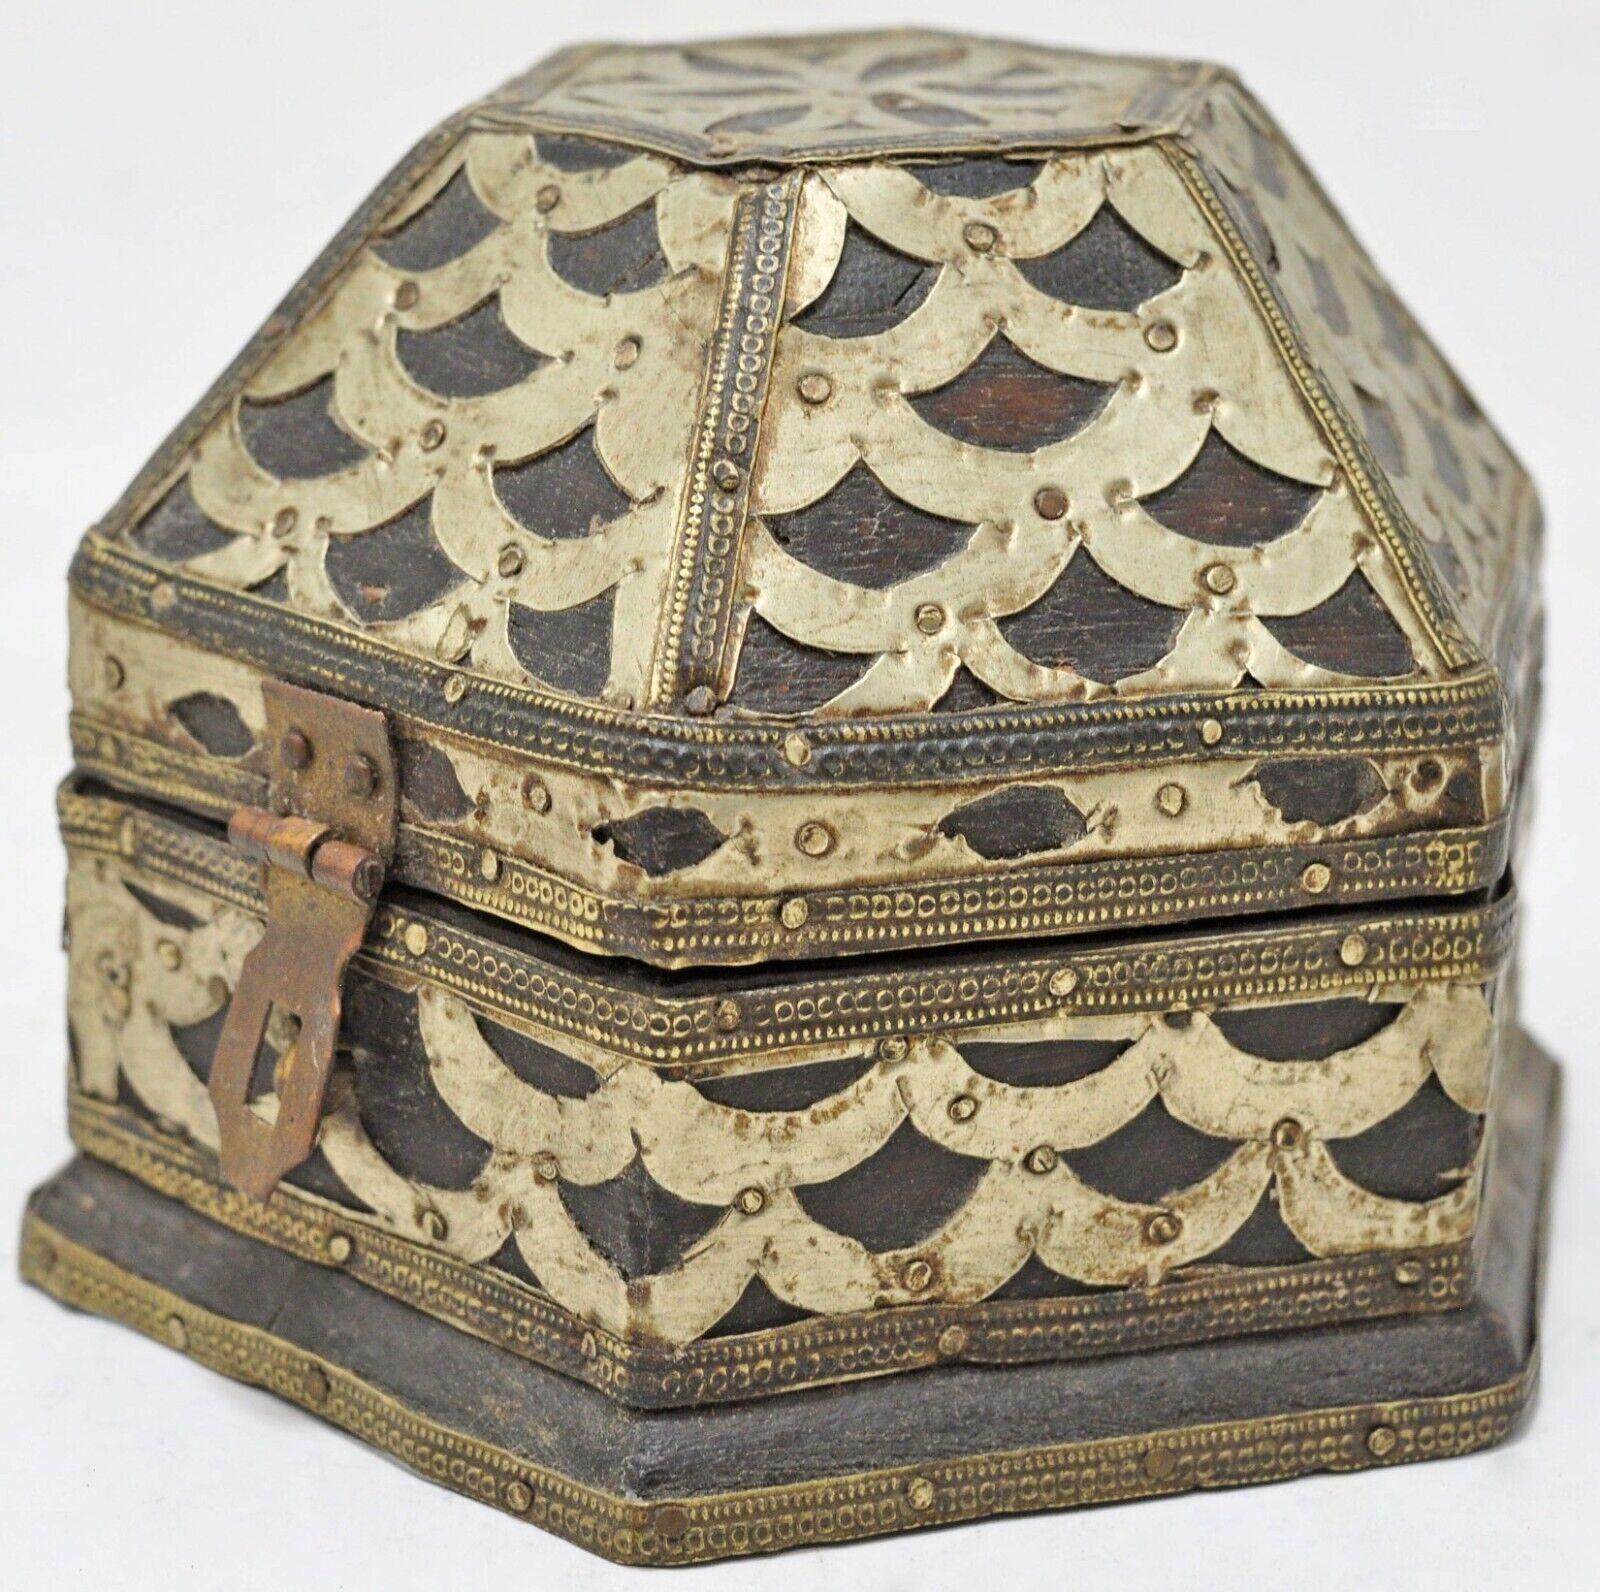 Small and elaborate Hand-Made Vintage Indian Decorative Trinket Box

Anonymous
Probably Eastern India; ca. 1900
Wood, white metal and brass

Approximate size: 4.8 x 4.4 x 3.4 in.

This early 20th century trinket box is rich in distinctive decorative